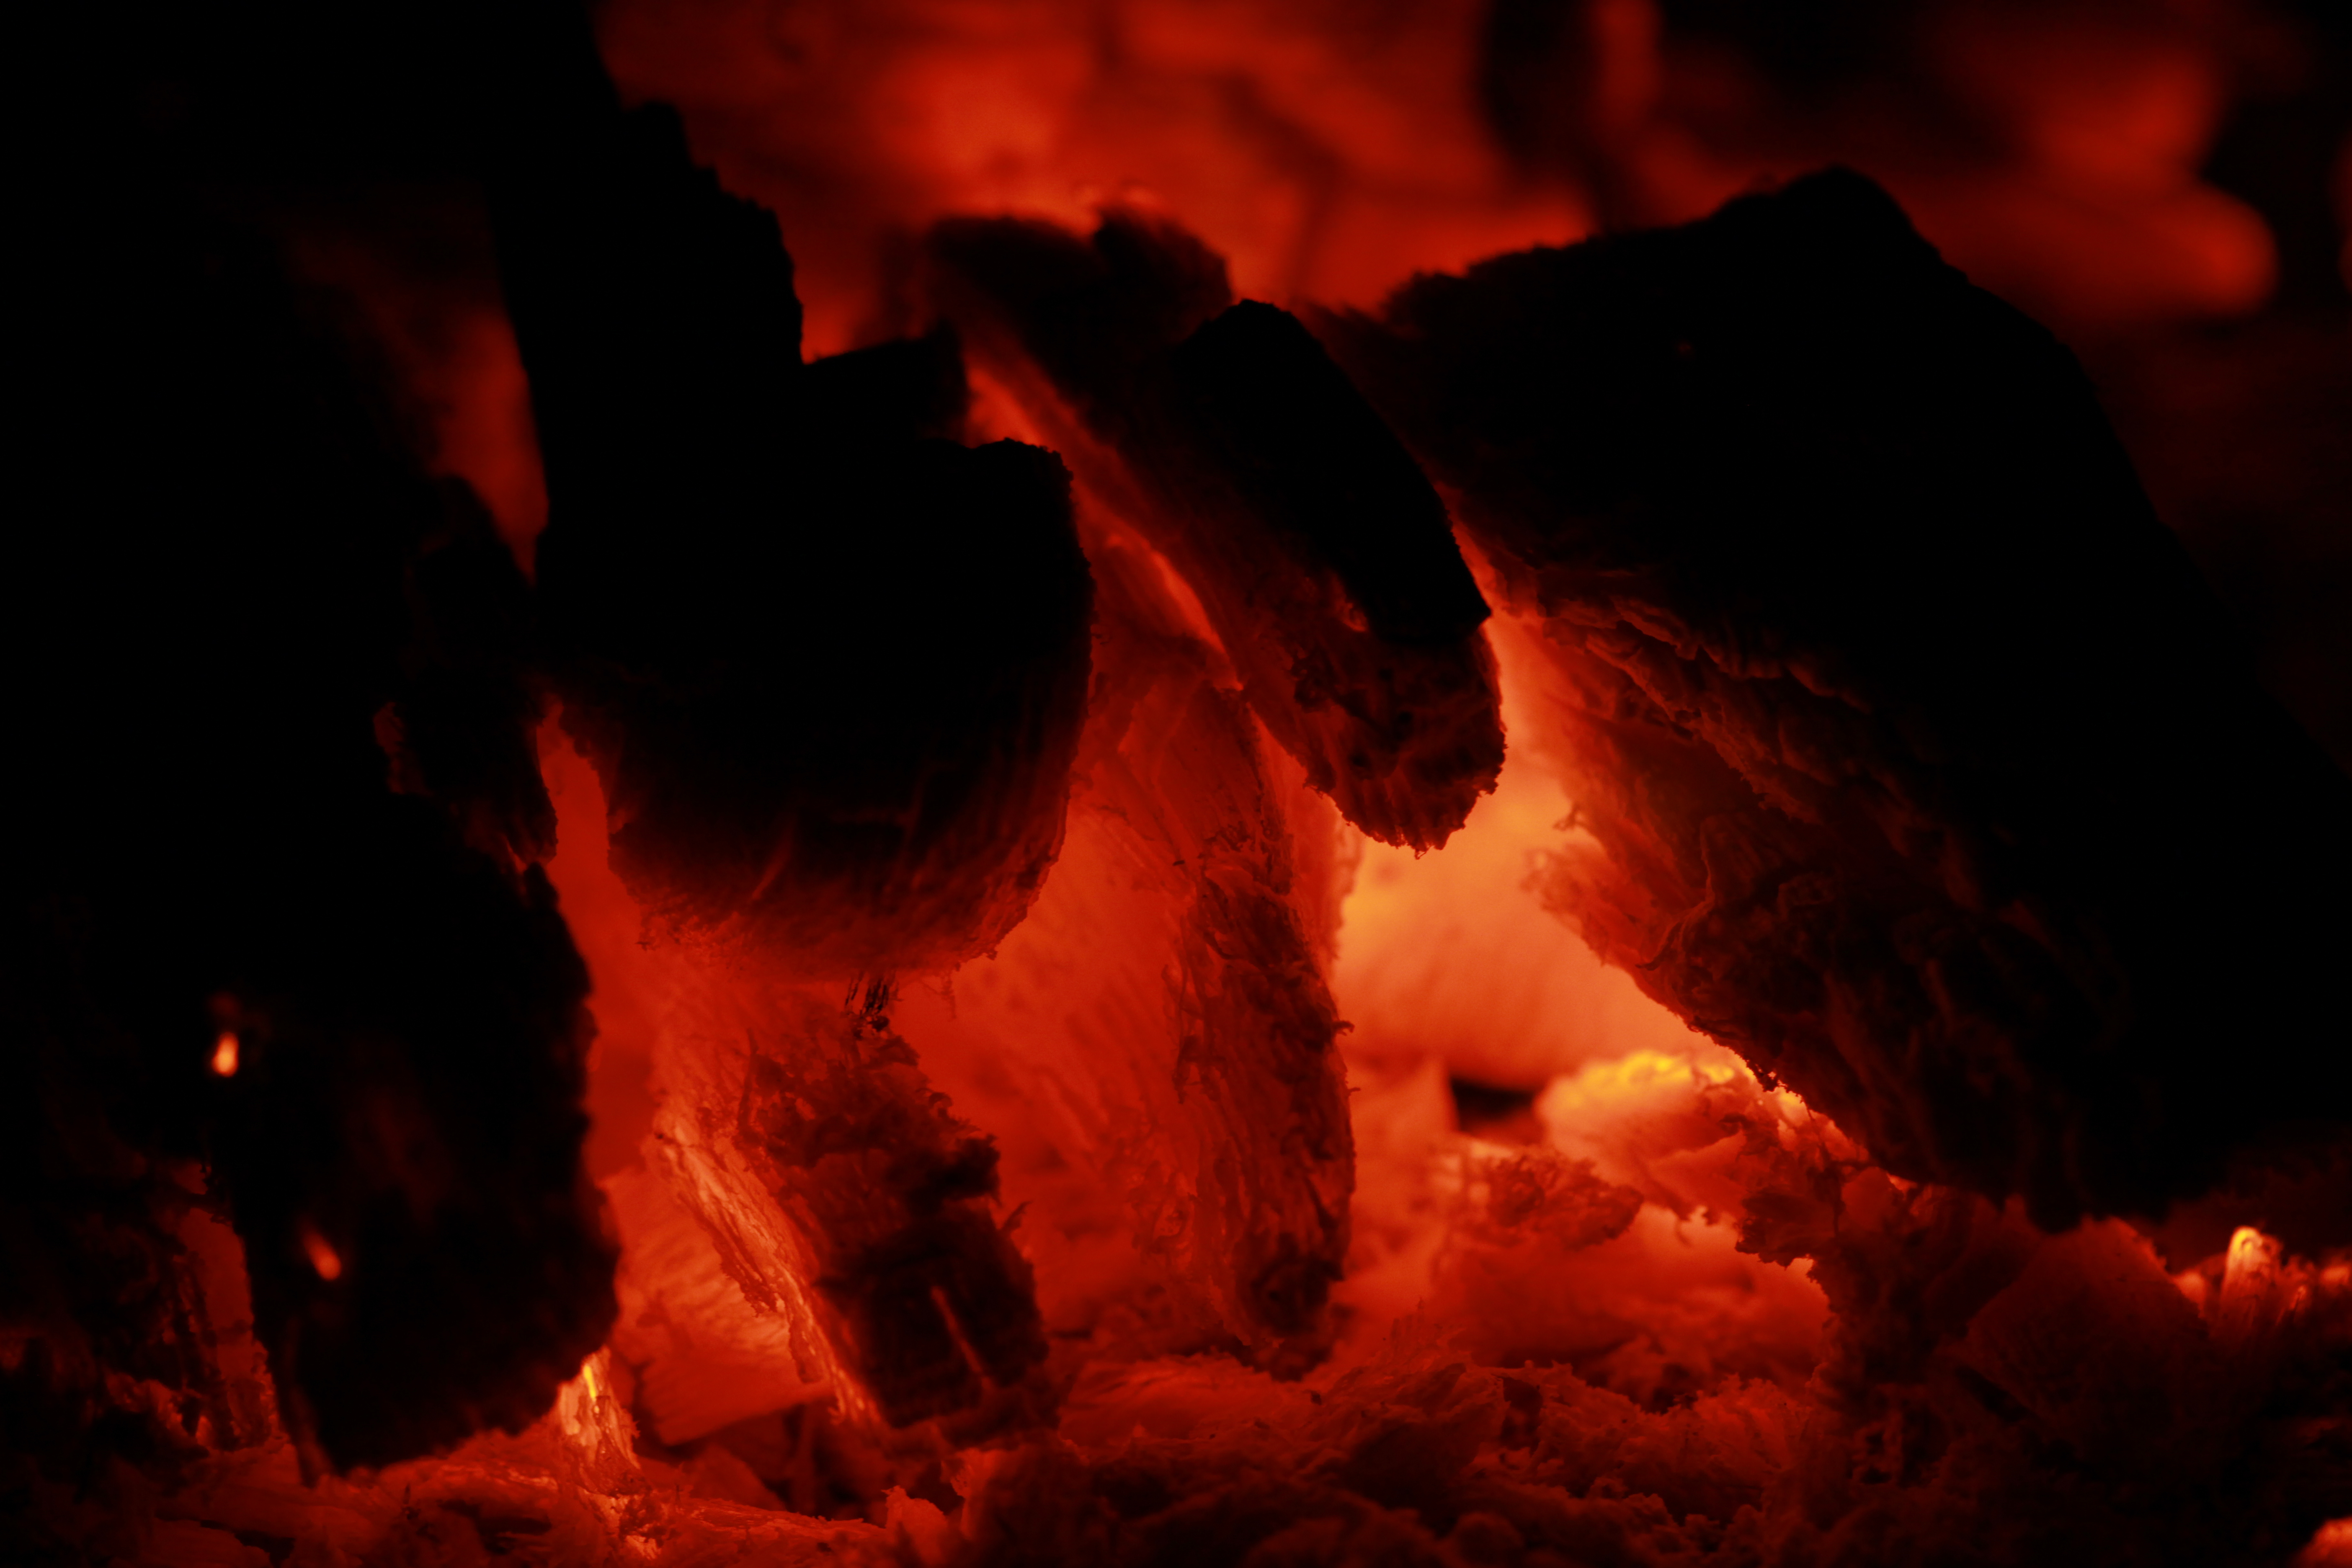 119140 download wallpaper fire, bonfire, coals, macro, ash, smoldering, smouldering screensavers and pictures for free